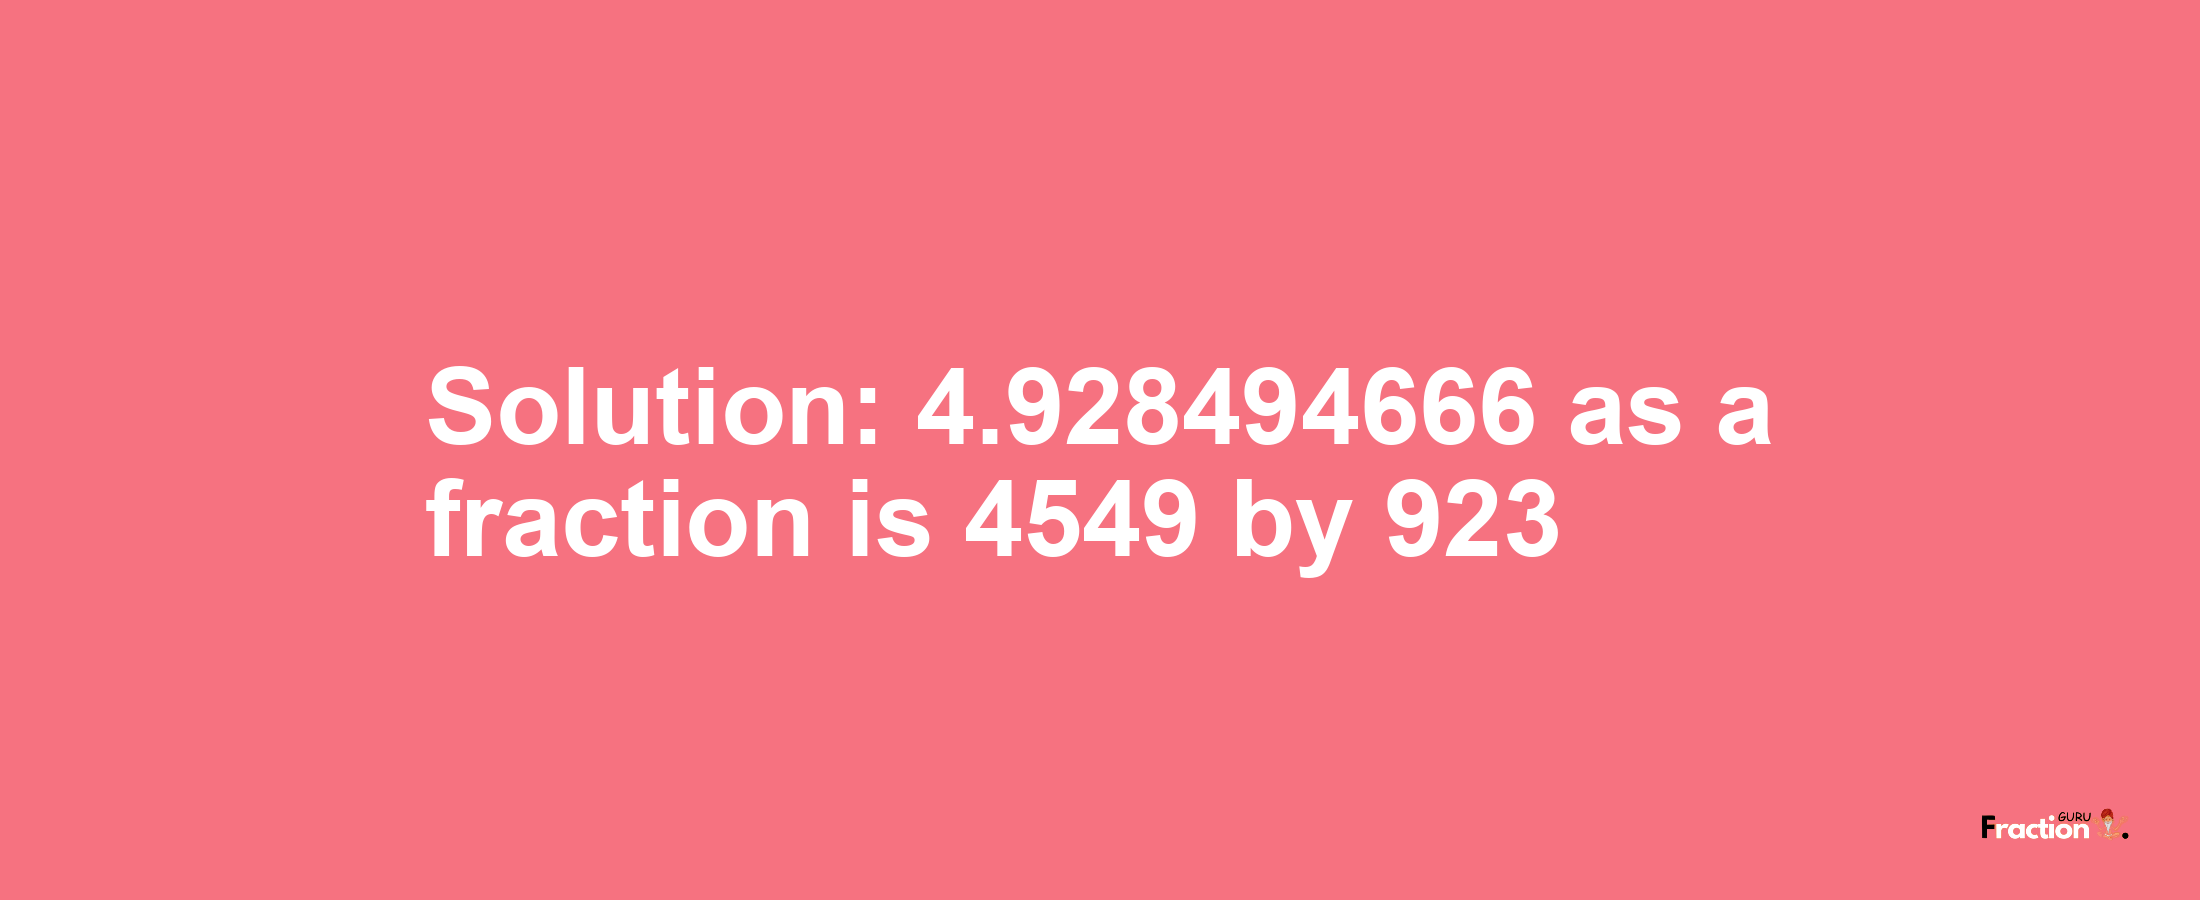 Solution:4.928494666 as a fraction is 4549/923